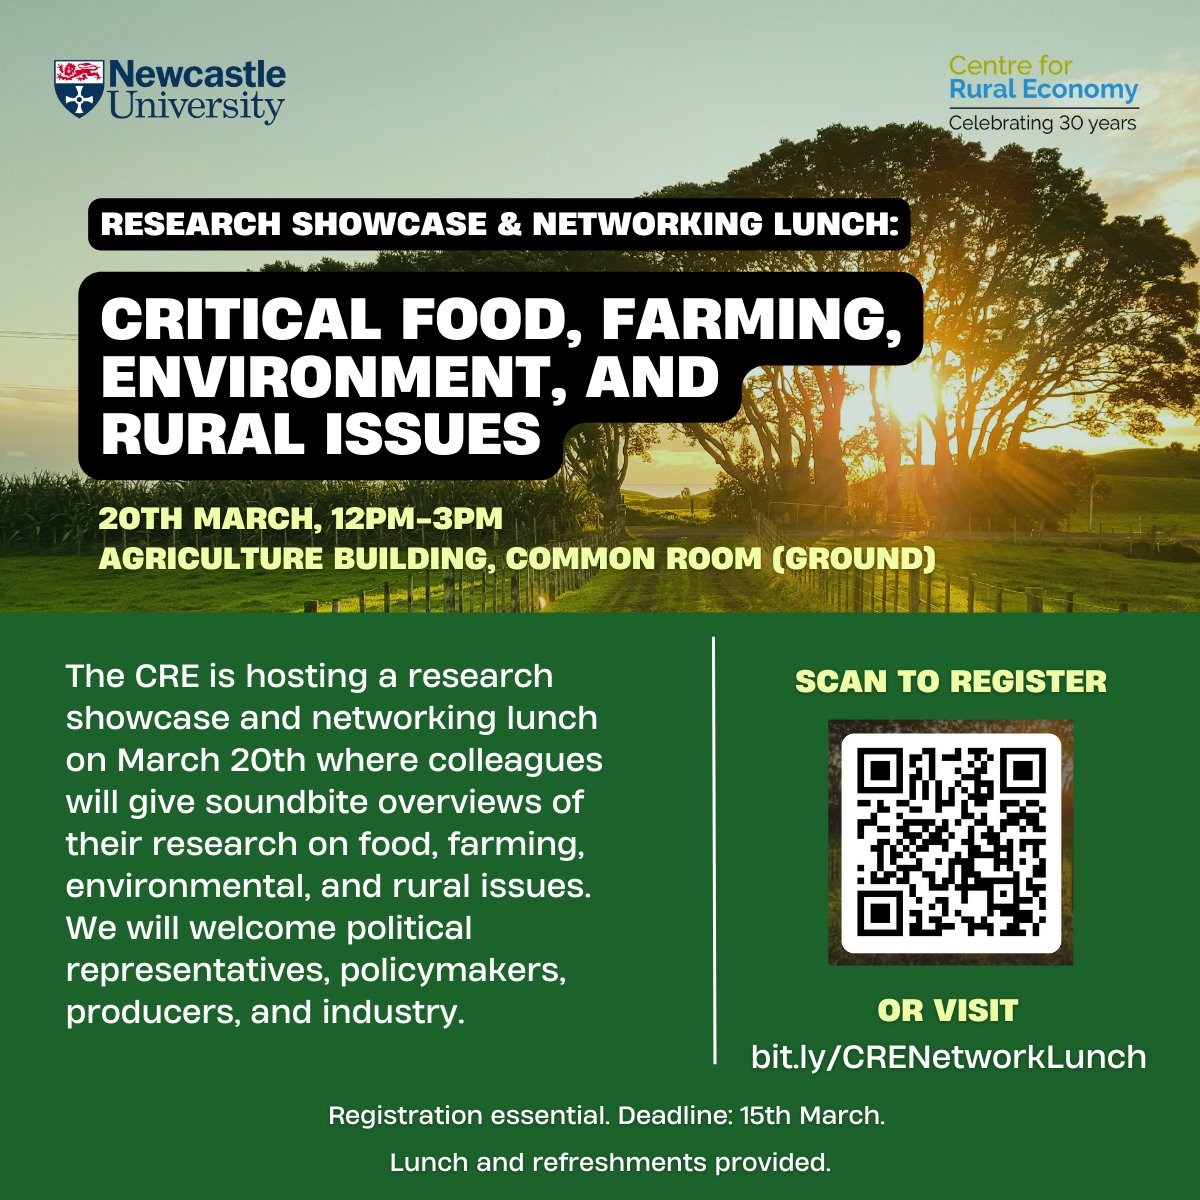 Join us on March 20th to discuss food, farming, environment and rural issues. Register at bit.ly/CRENetworkLunch